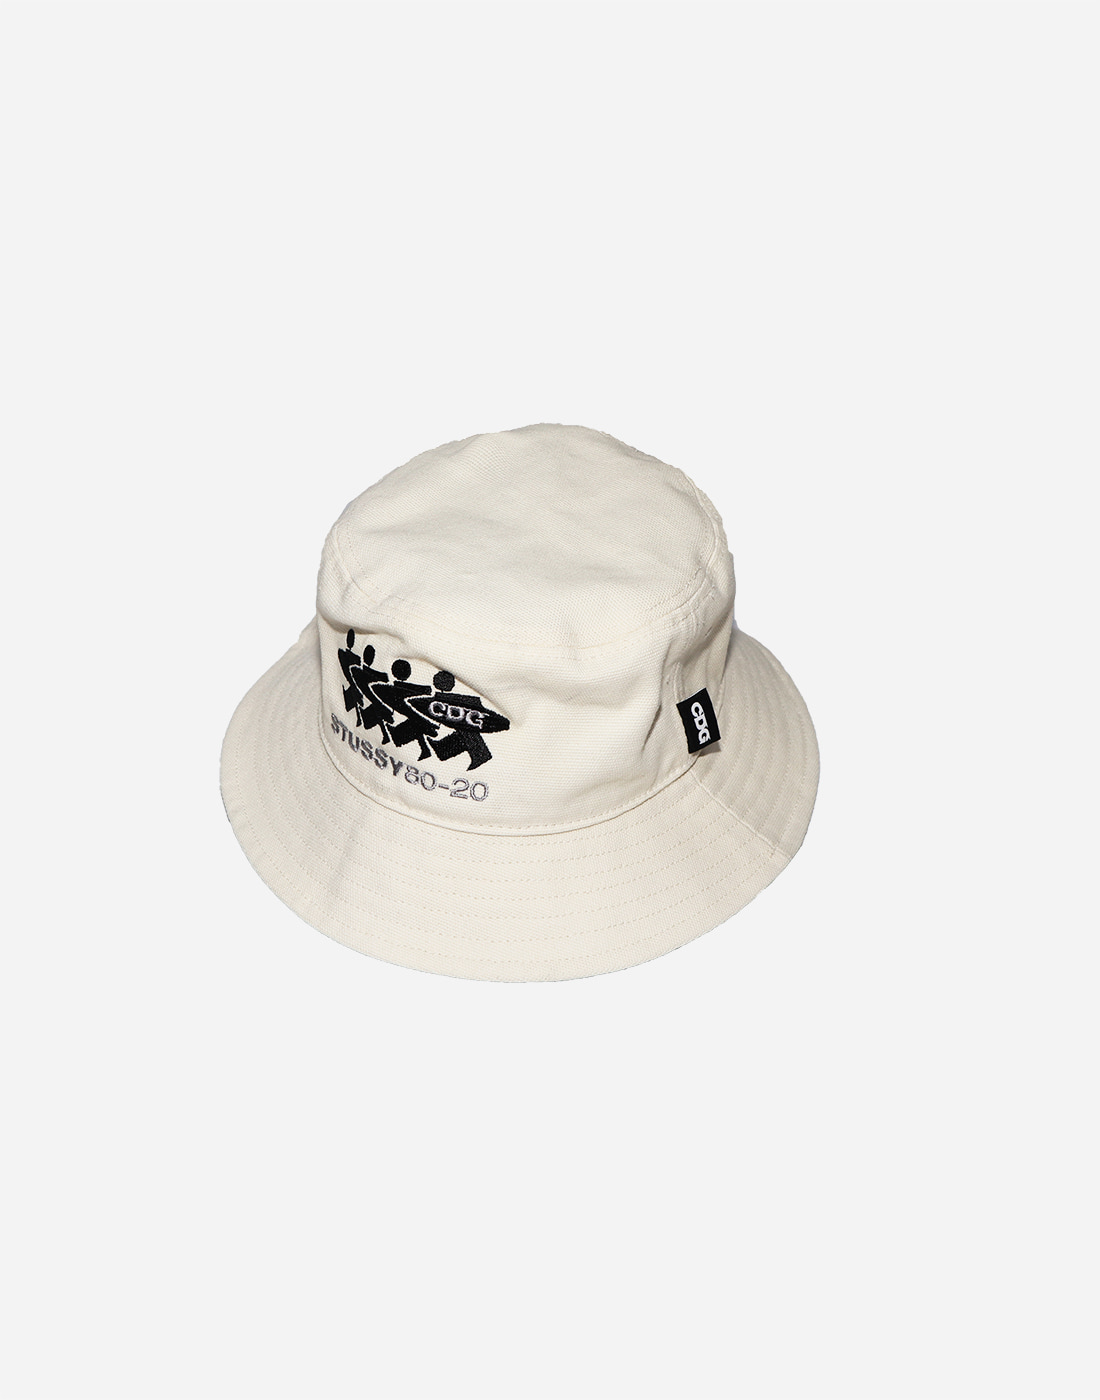 STUSSY x CDG Canvas Bucket Hat, Natural